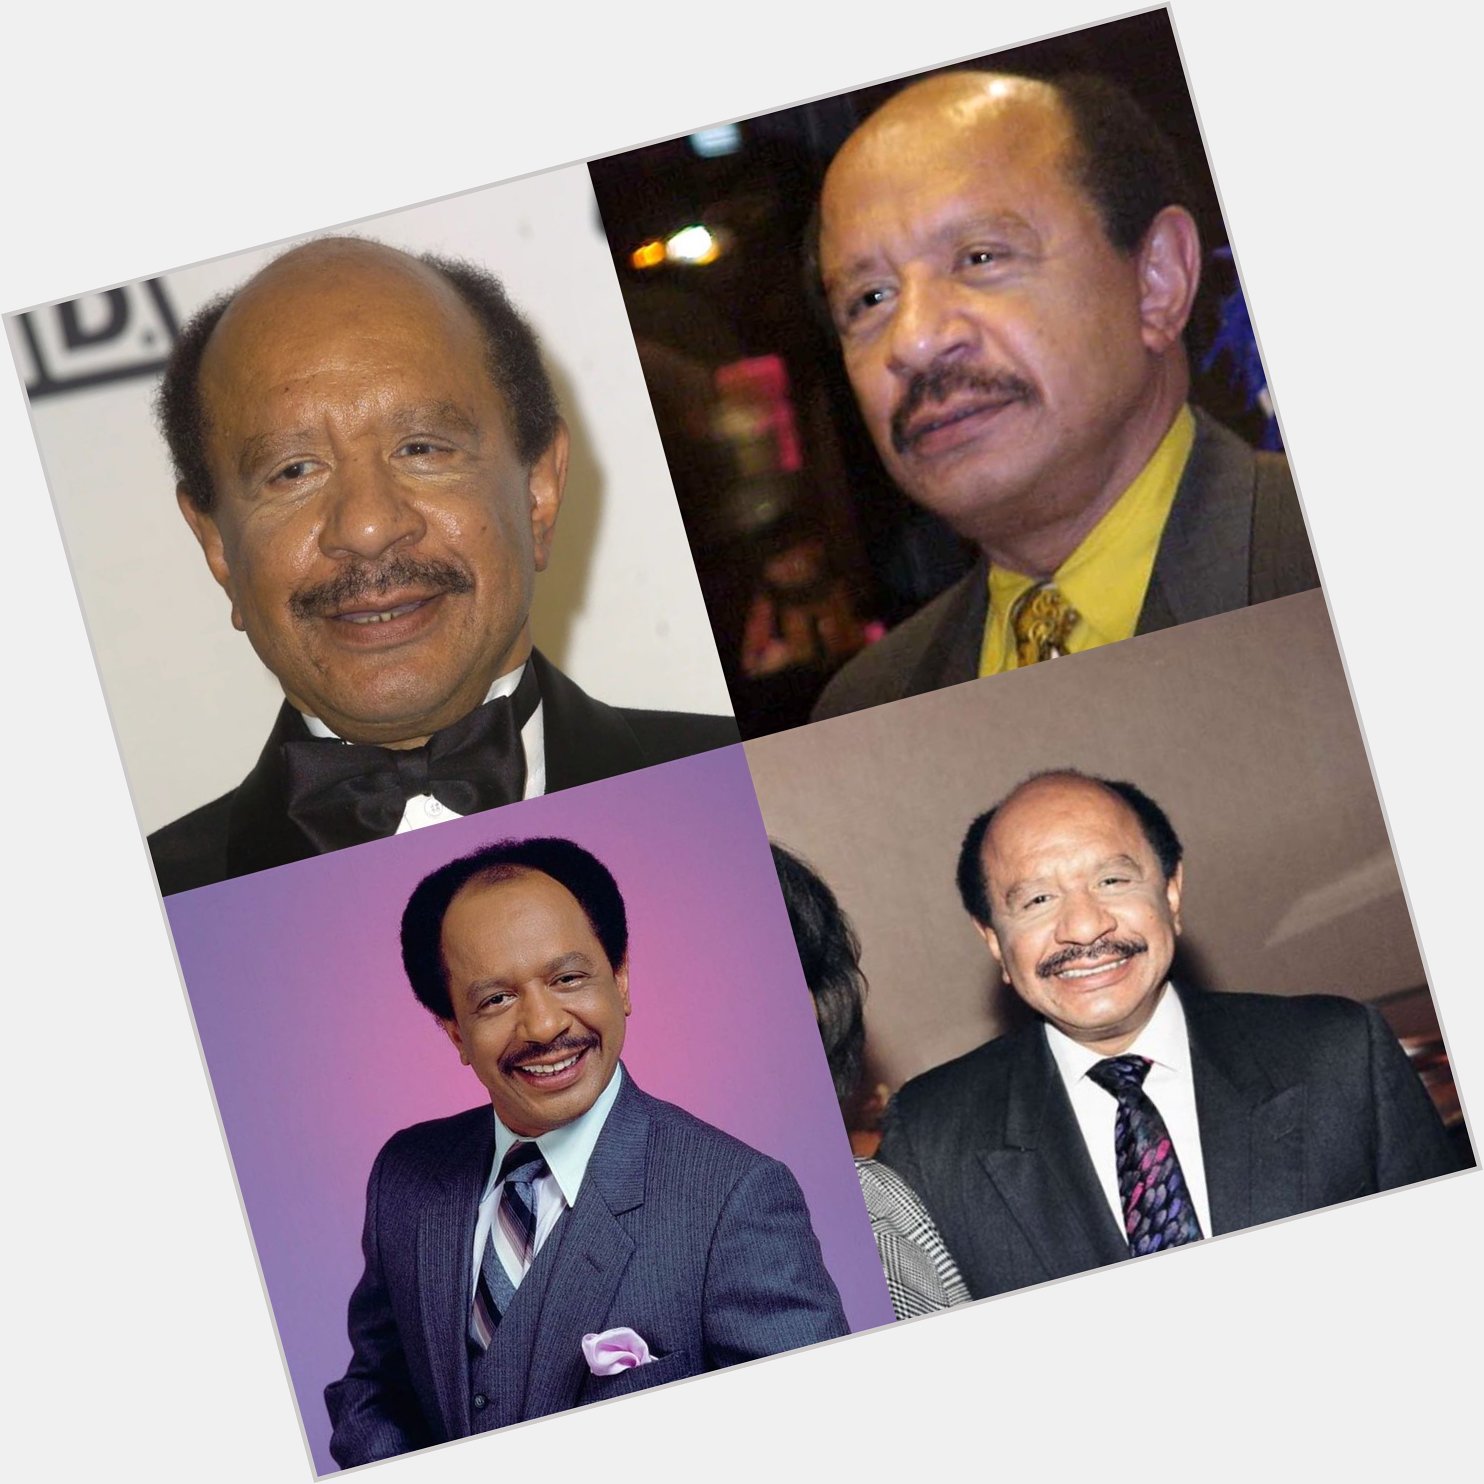 Happy 83 birthday to Sherman Hemsley  up in heaven. May he Rest In Peace.  